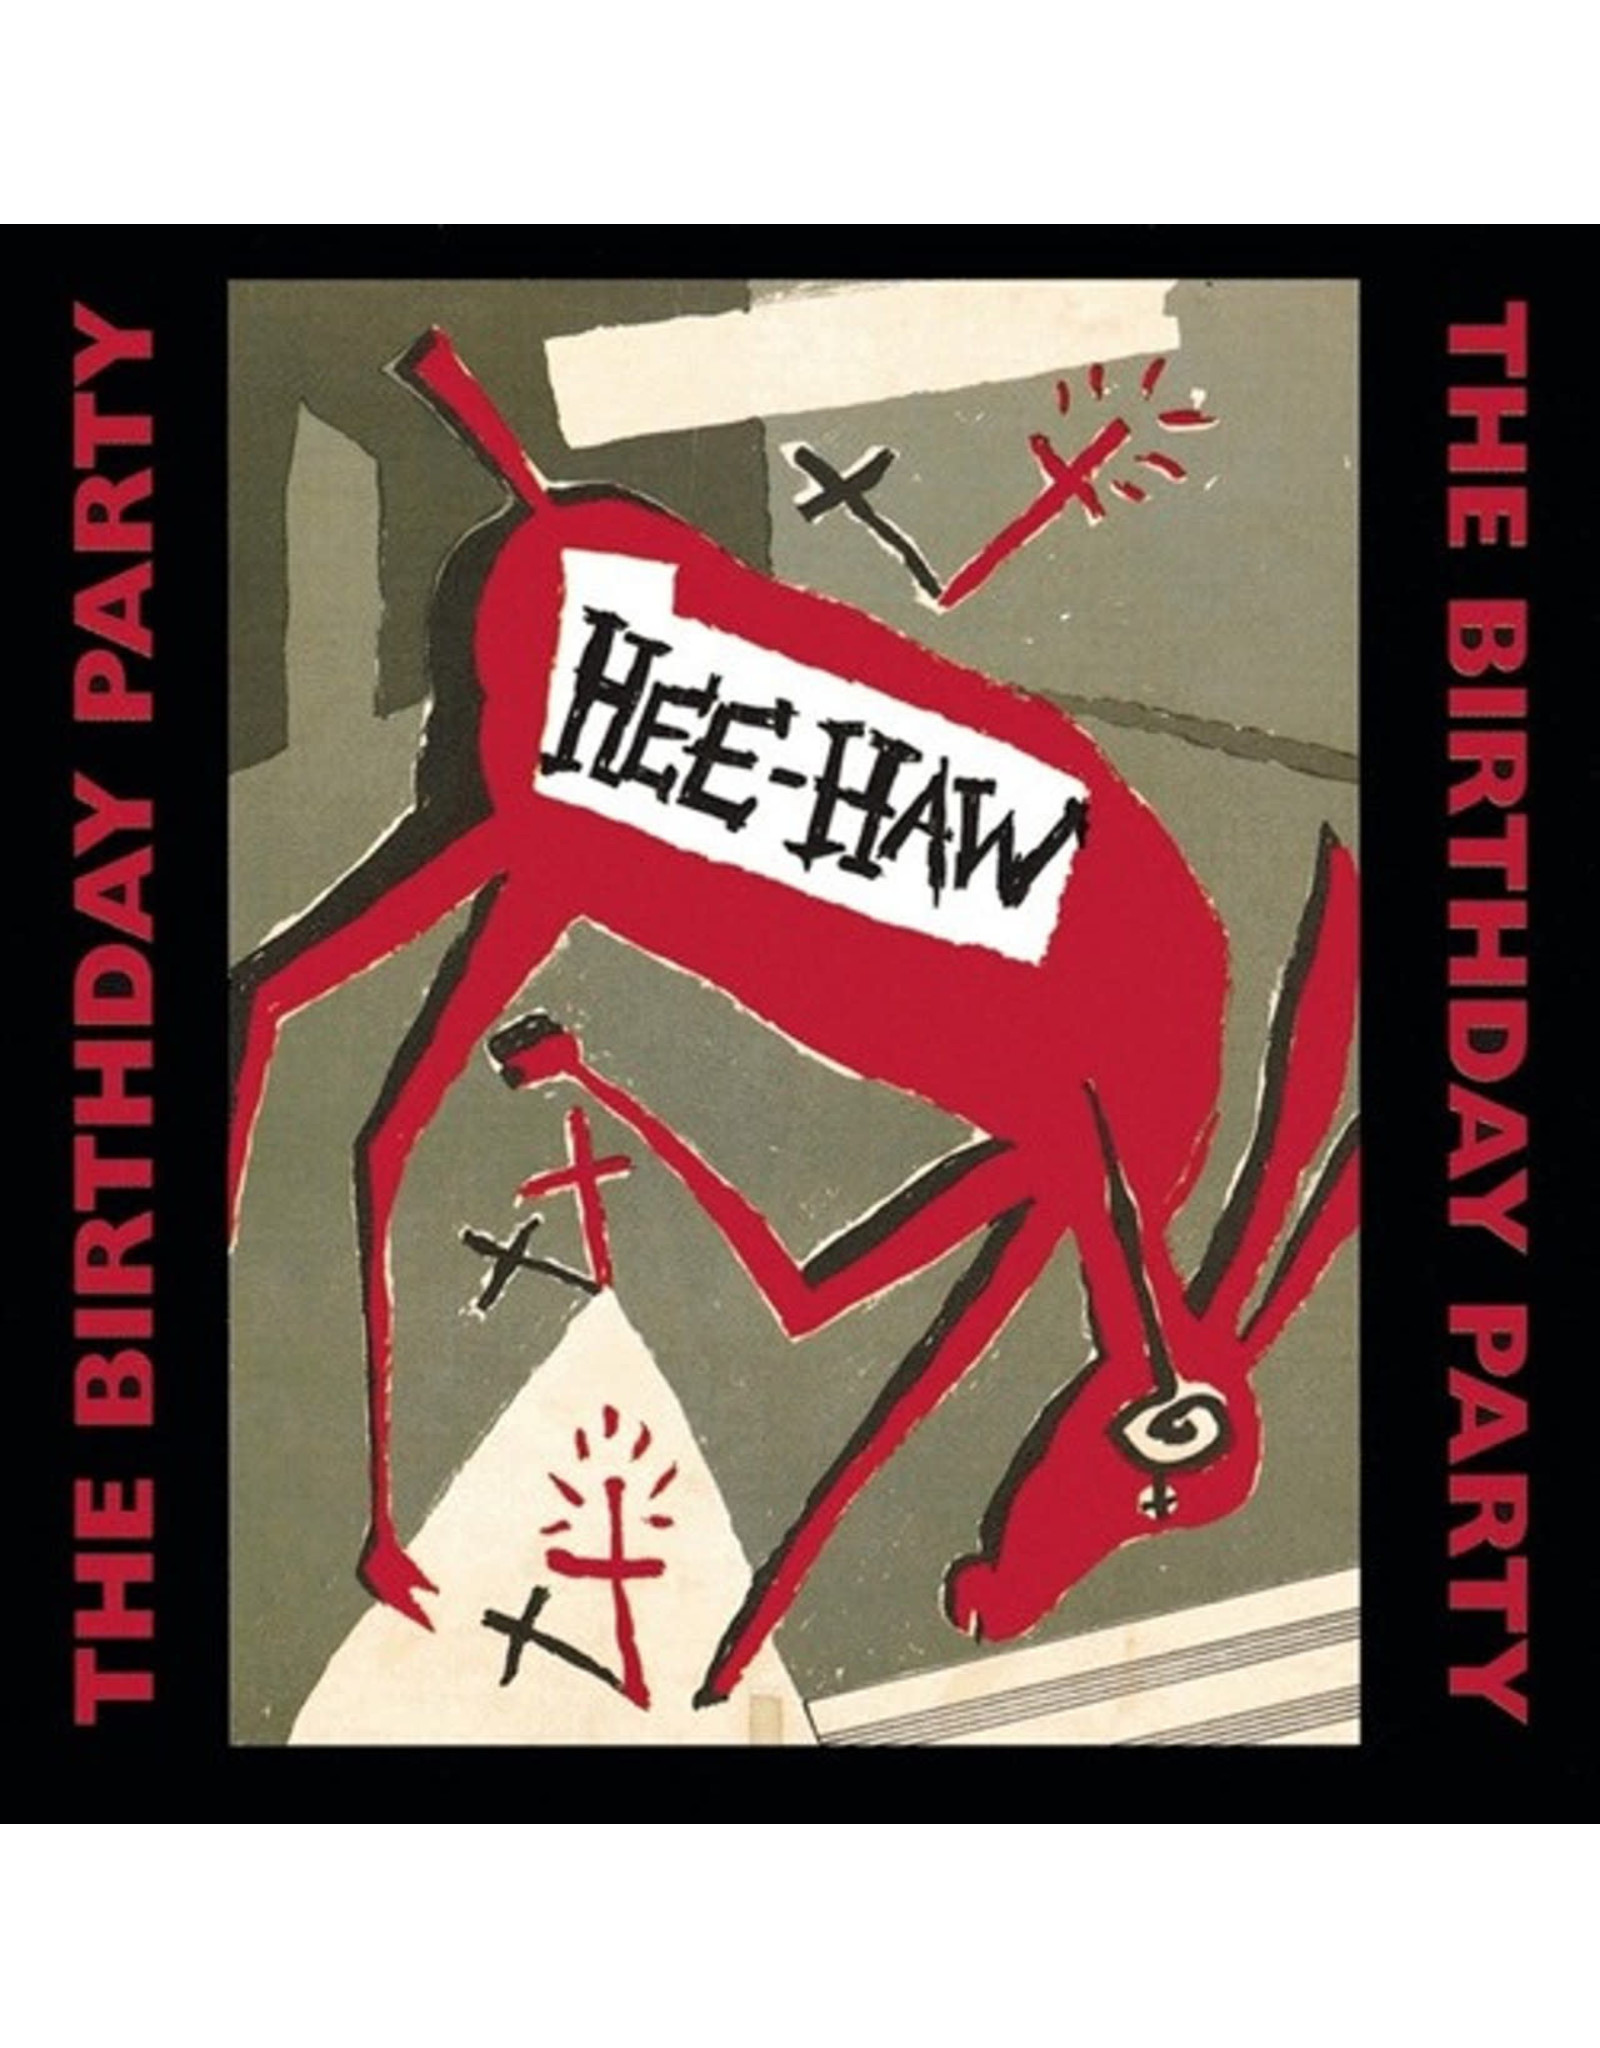 Drastic Plastic Birthday Party: Hee-Haw (red, black & white) LP